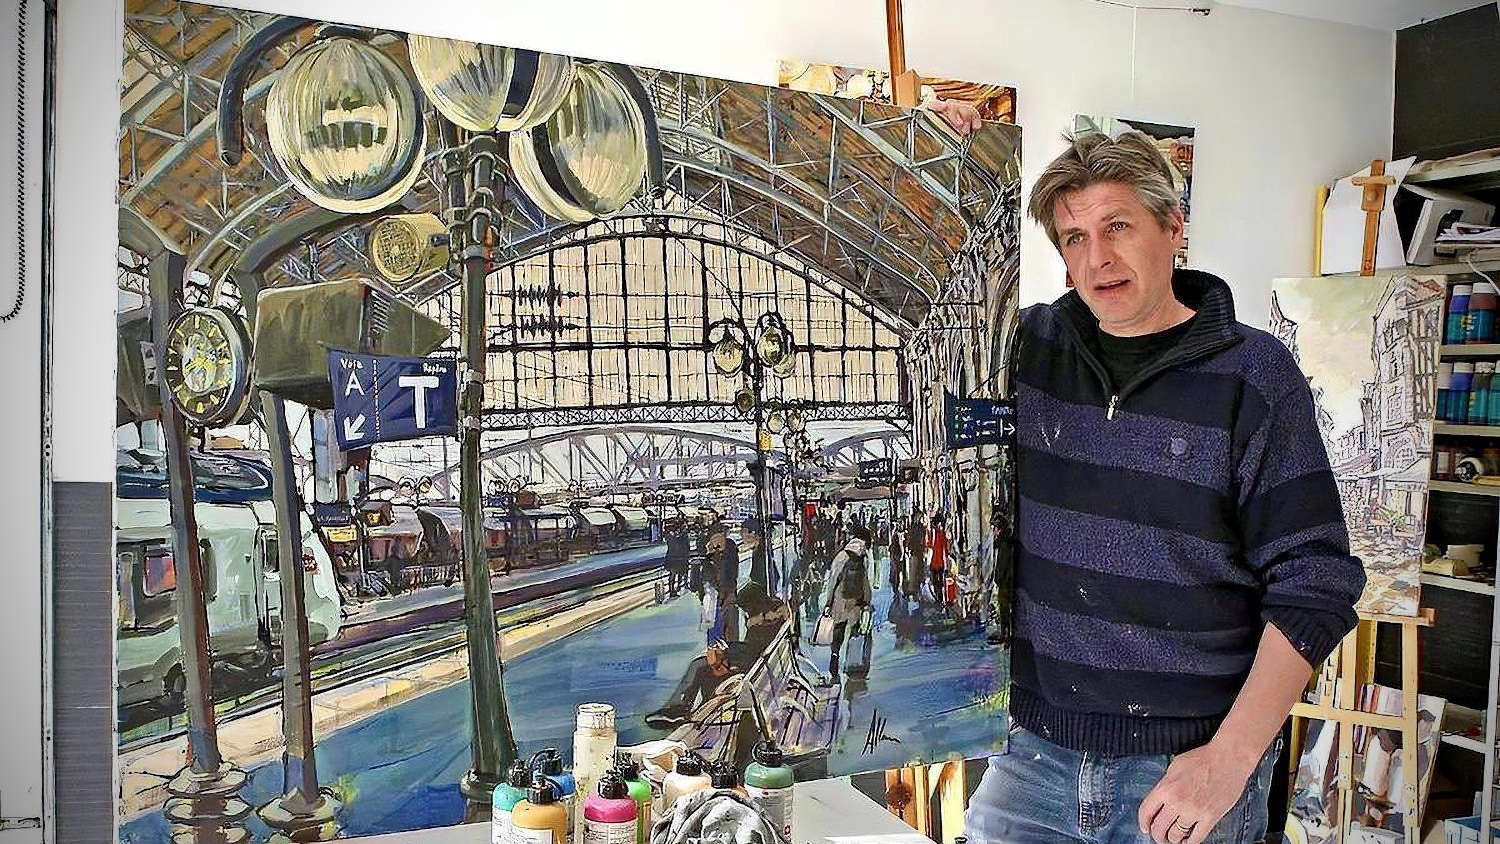 artist allan stephens with one of his large format artworks 